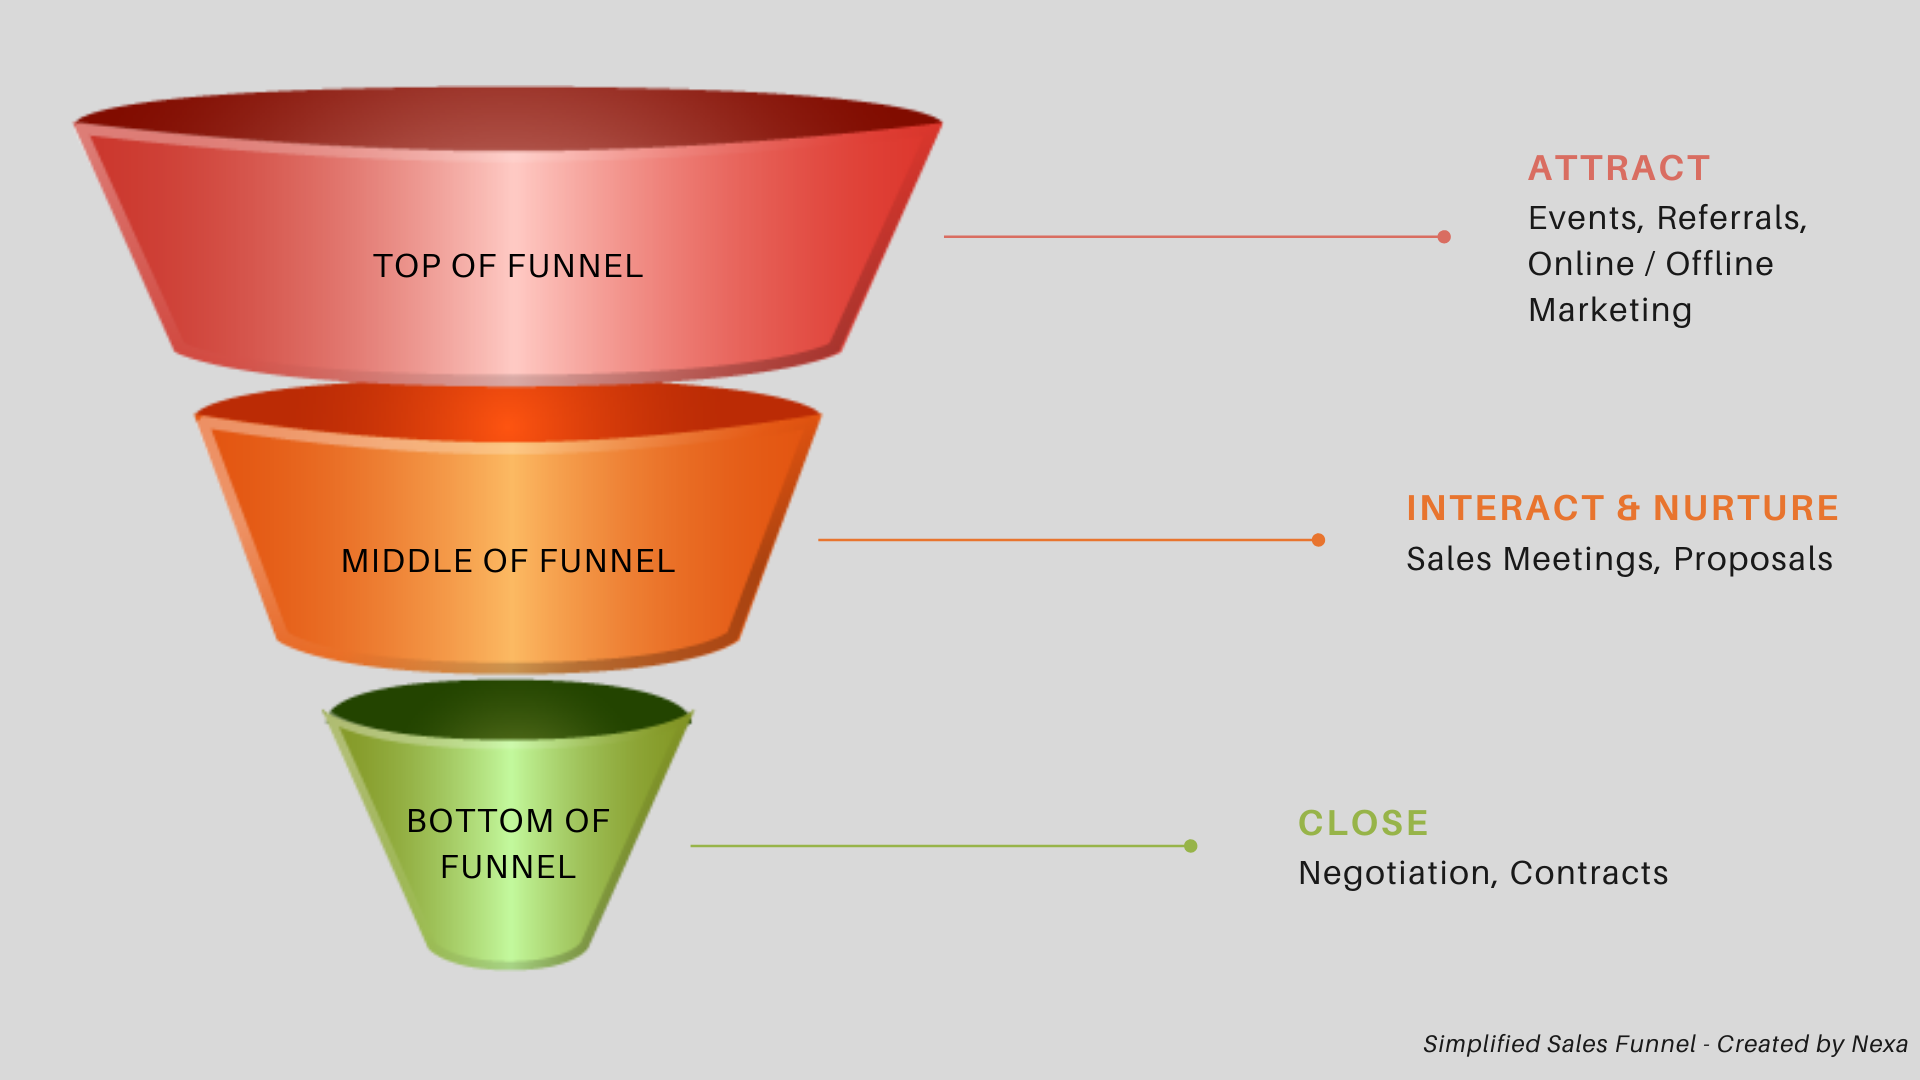 Simplified Sales Funnel by Nexa